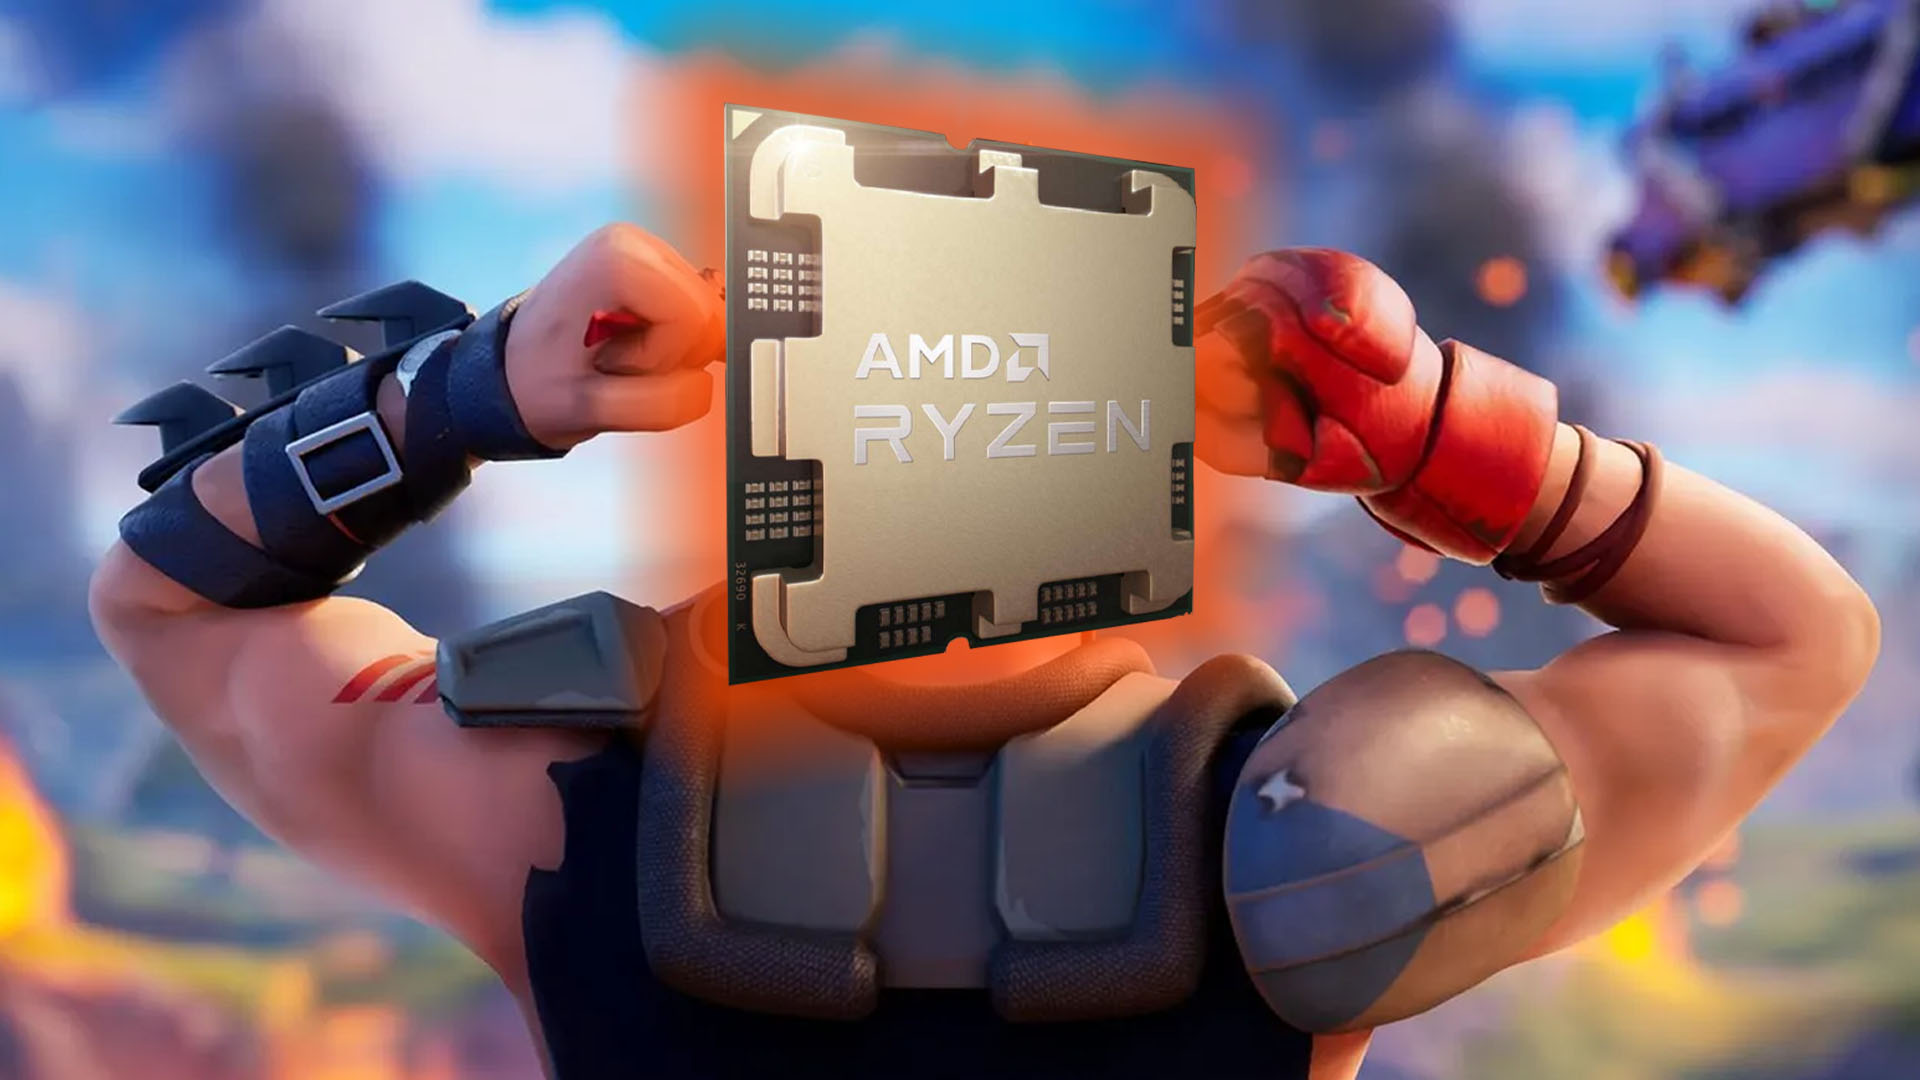 AMD's new CPU hits 132fps in Fortnite without a graphics card